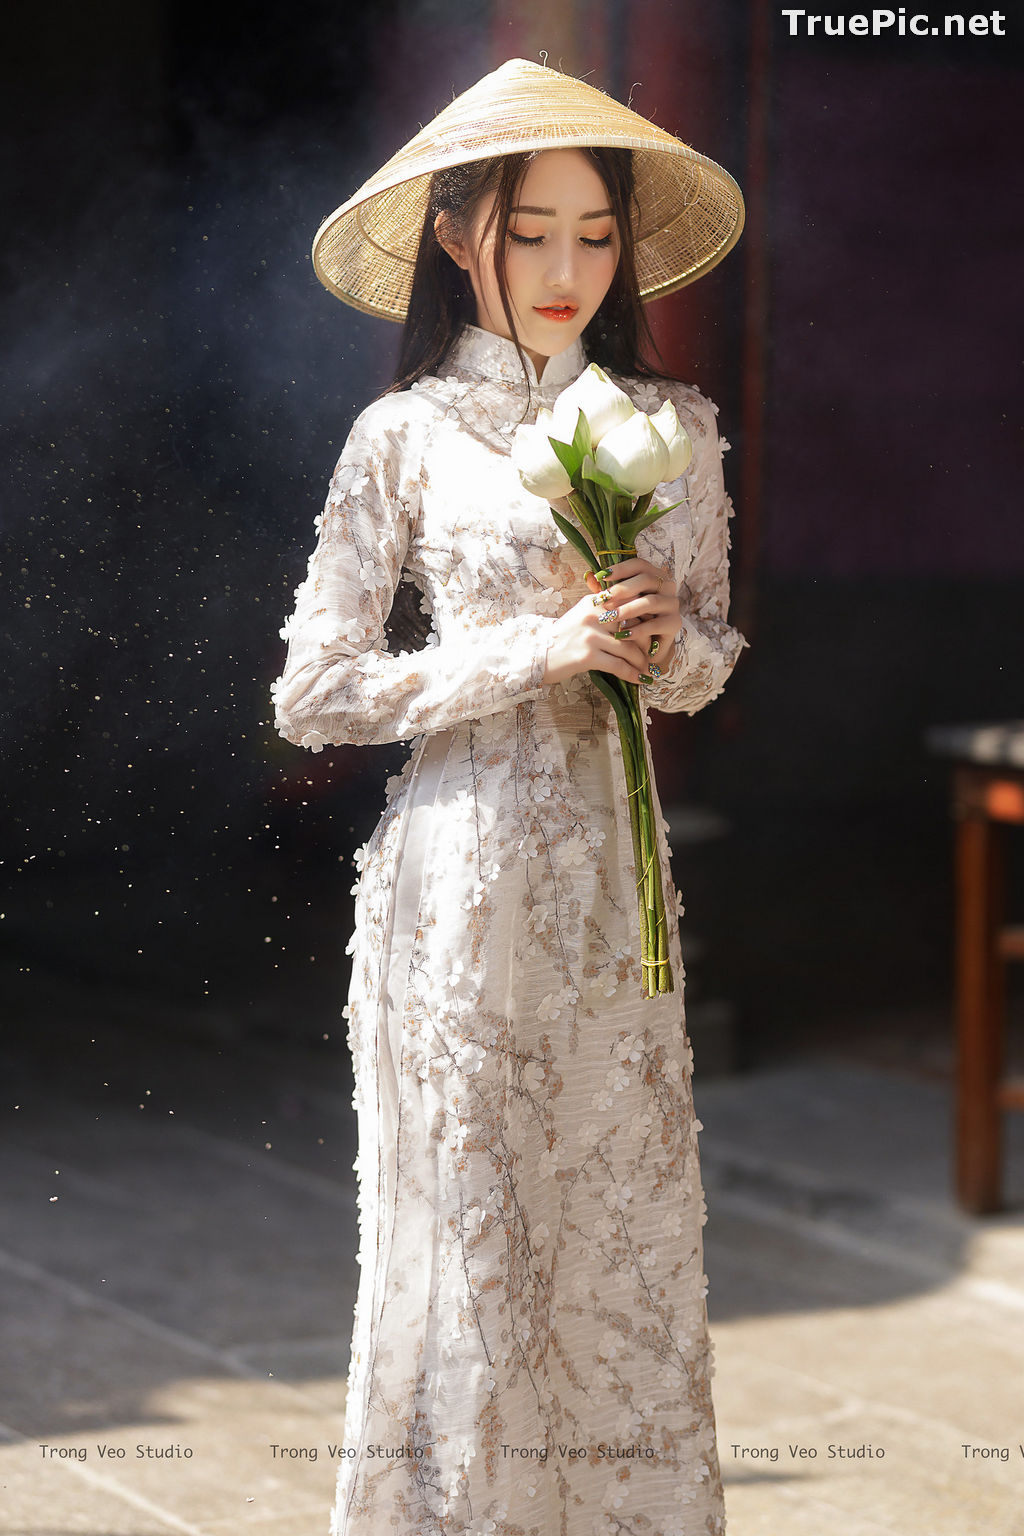 Image The Beauty of Vietnamese Girls with Traditional Dress (Ao Dai) #2 - TruePic.net - Picture-16